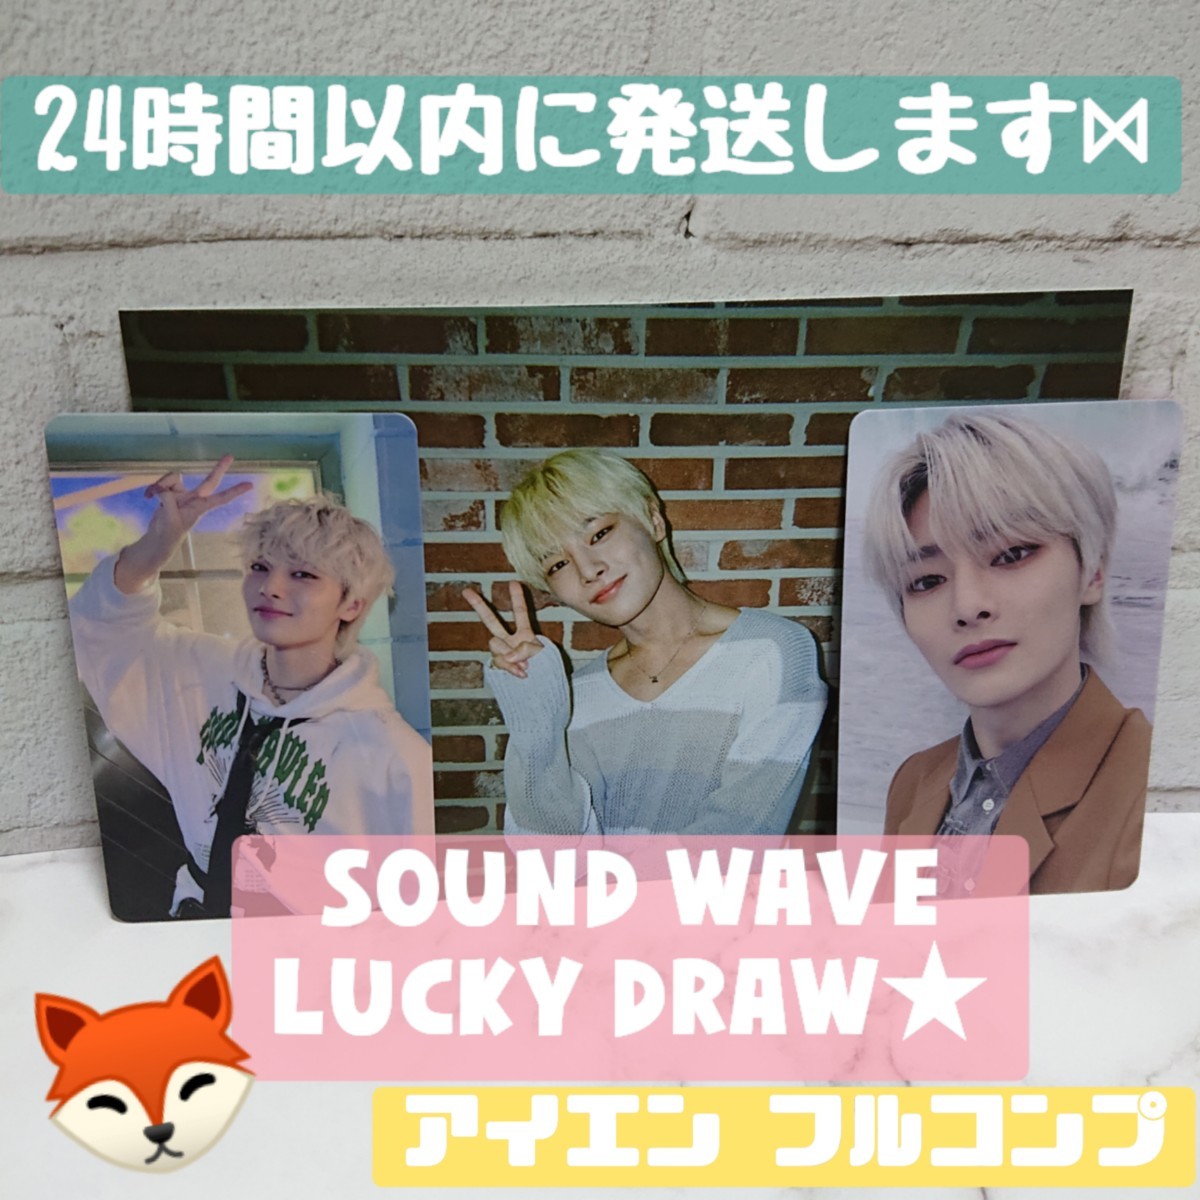 straykids MAXIDENT ★ SOUND WAVE LUCKY DRAW ★ ラキドロ アイエン 3セット